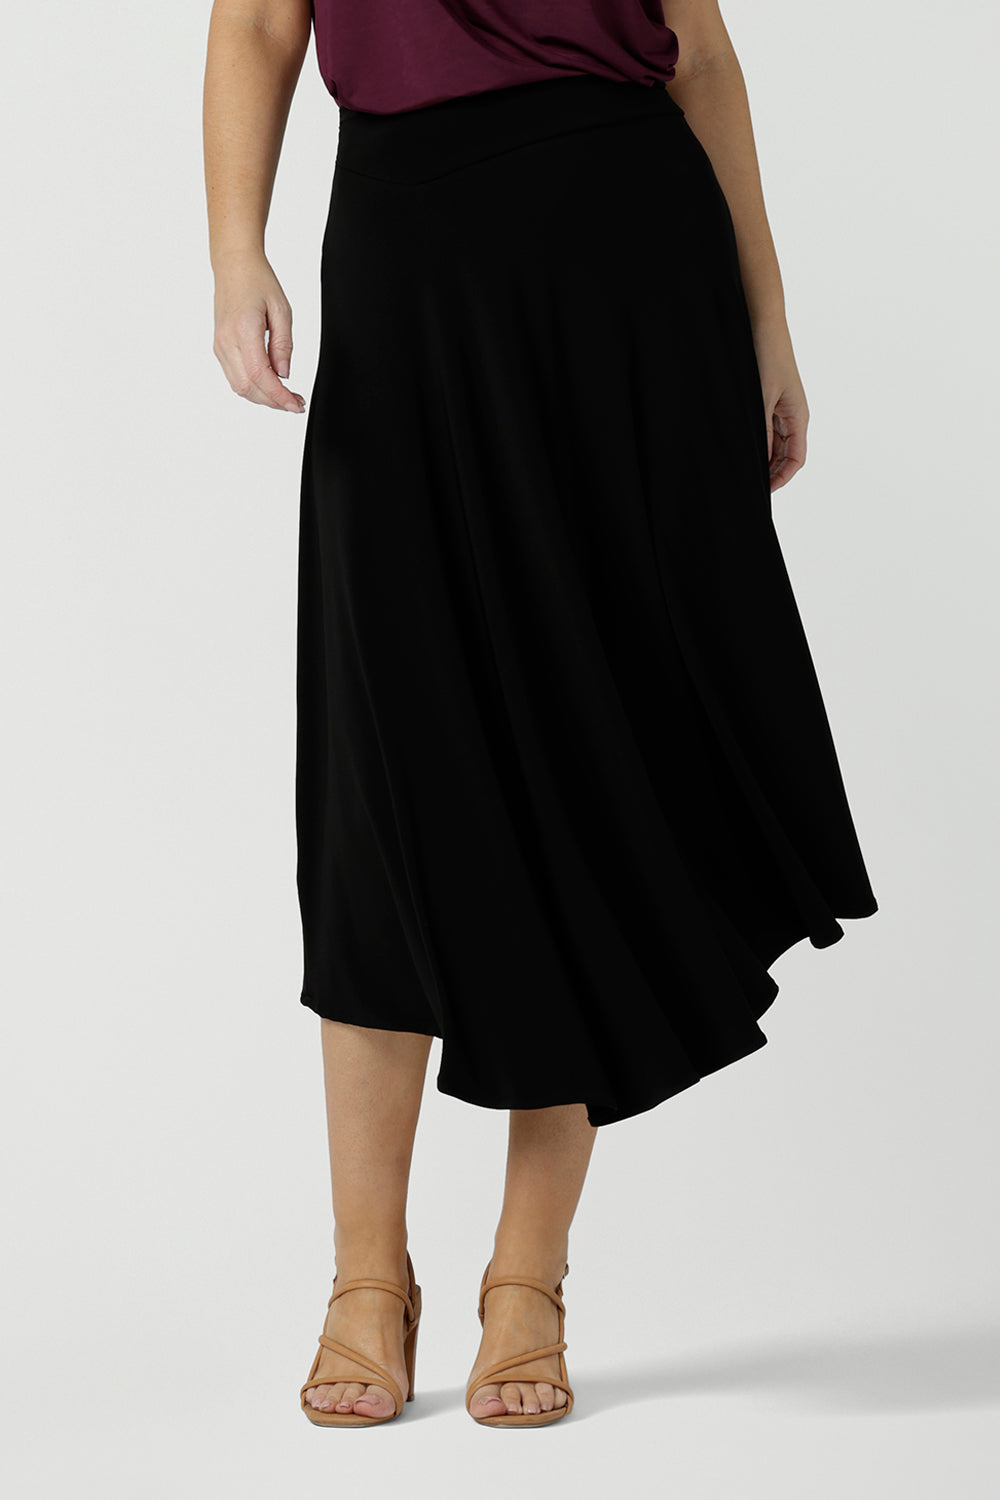 A size 10, 40 plus woman wears an asymmetric skirt in black jersey.  An easy-care skirt, this comfortable, knee-length jersey skirt works for work wear and eveningwear. Made in Australia by women's clothing brand, Leina & Fleur in petite, mid size and plus sizes. 